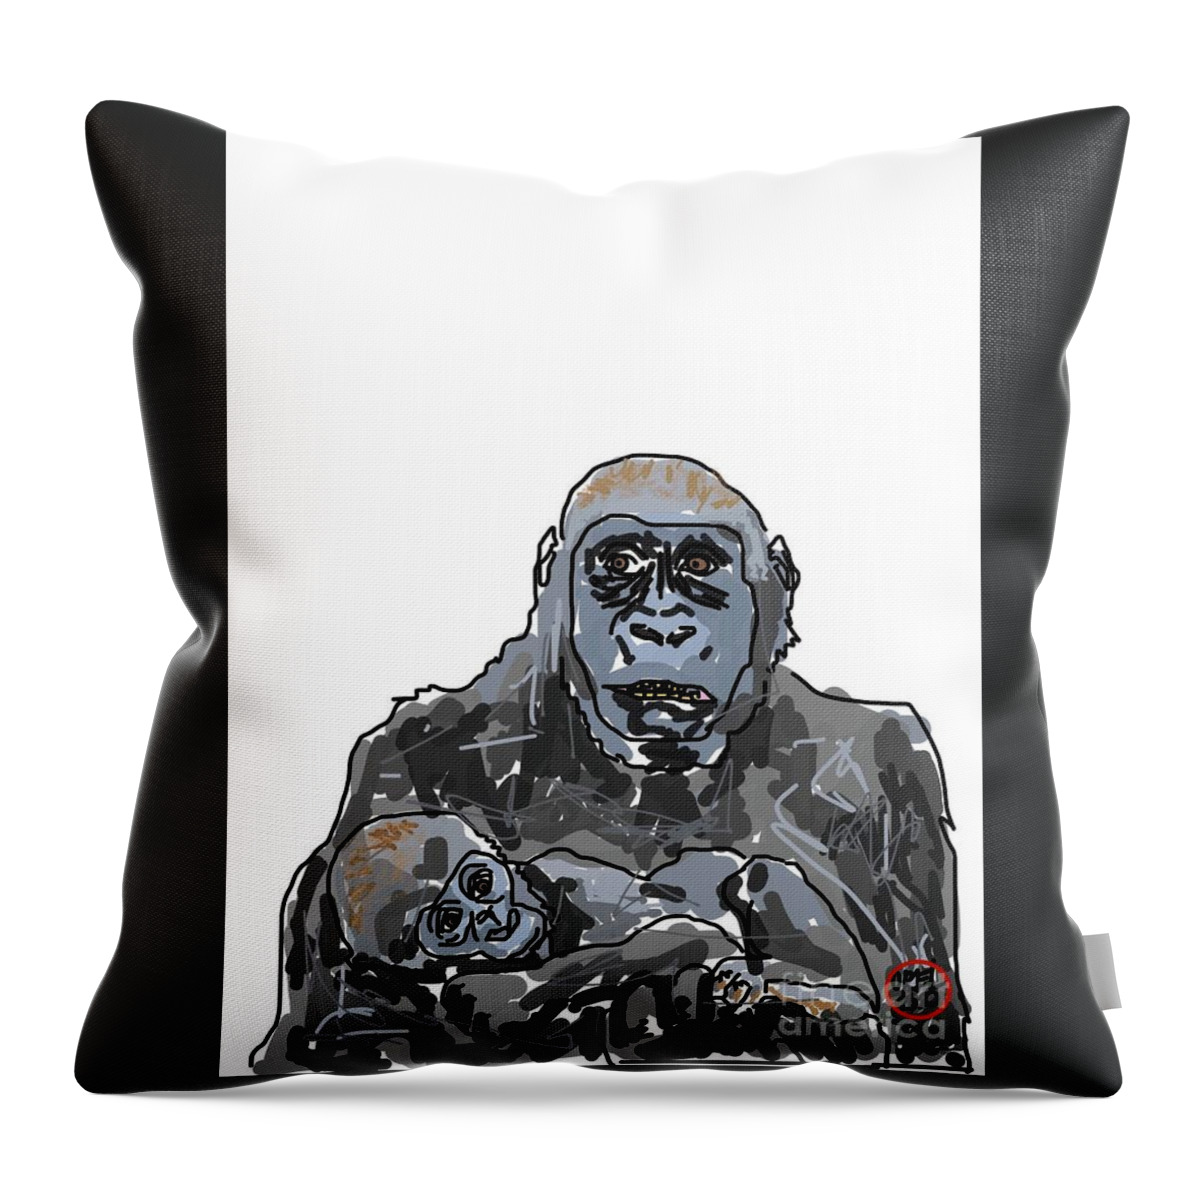  Throw Pillow featuring the painting Baby Gorrilla by Oriel Ceballos